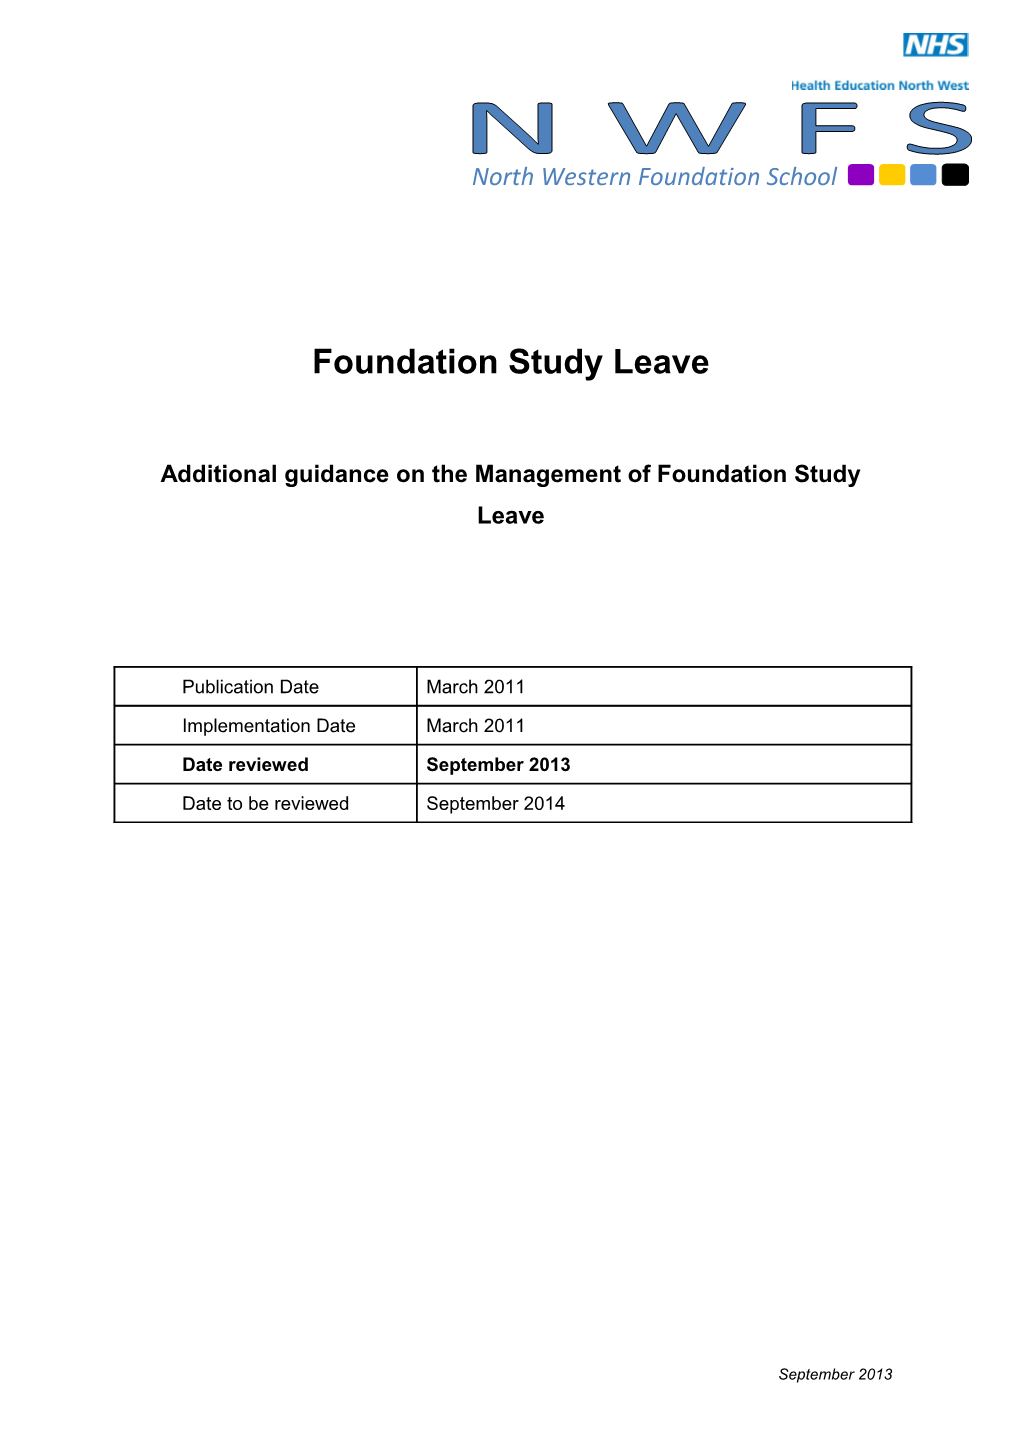 Additional Guidance on the Management of Foundation Study Leave